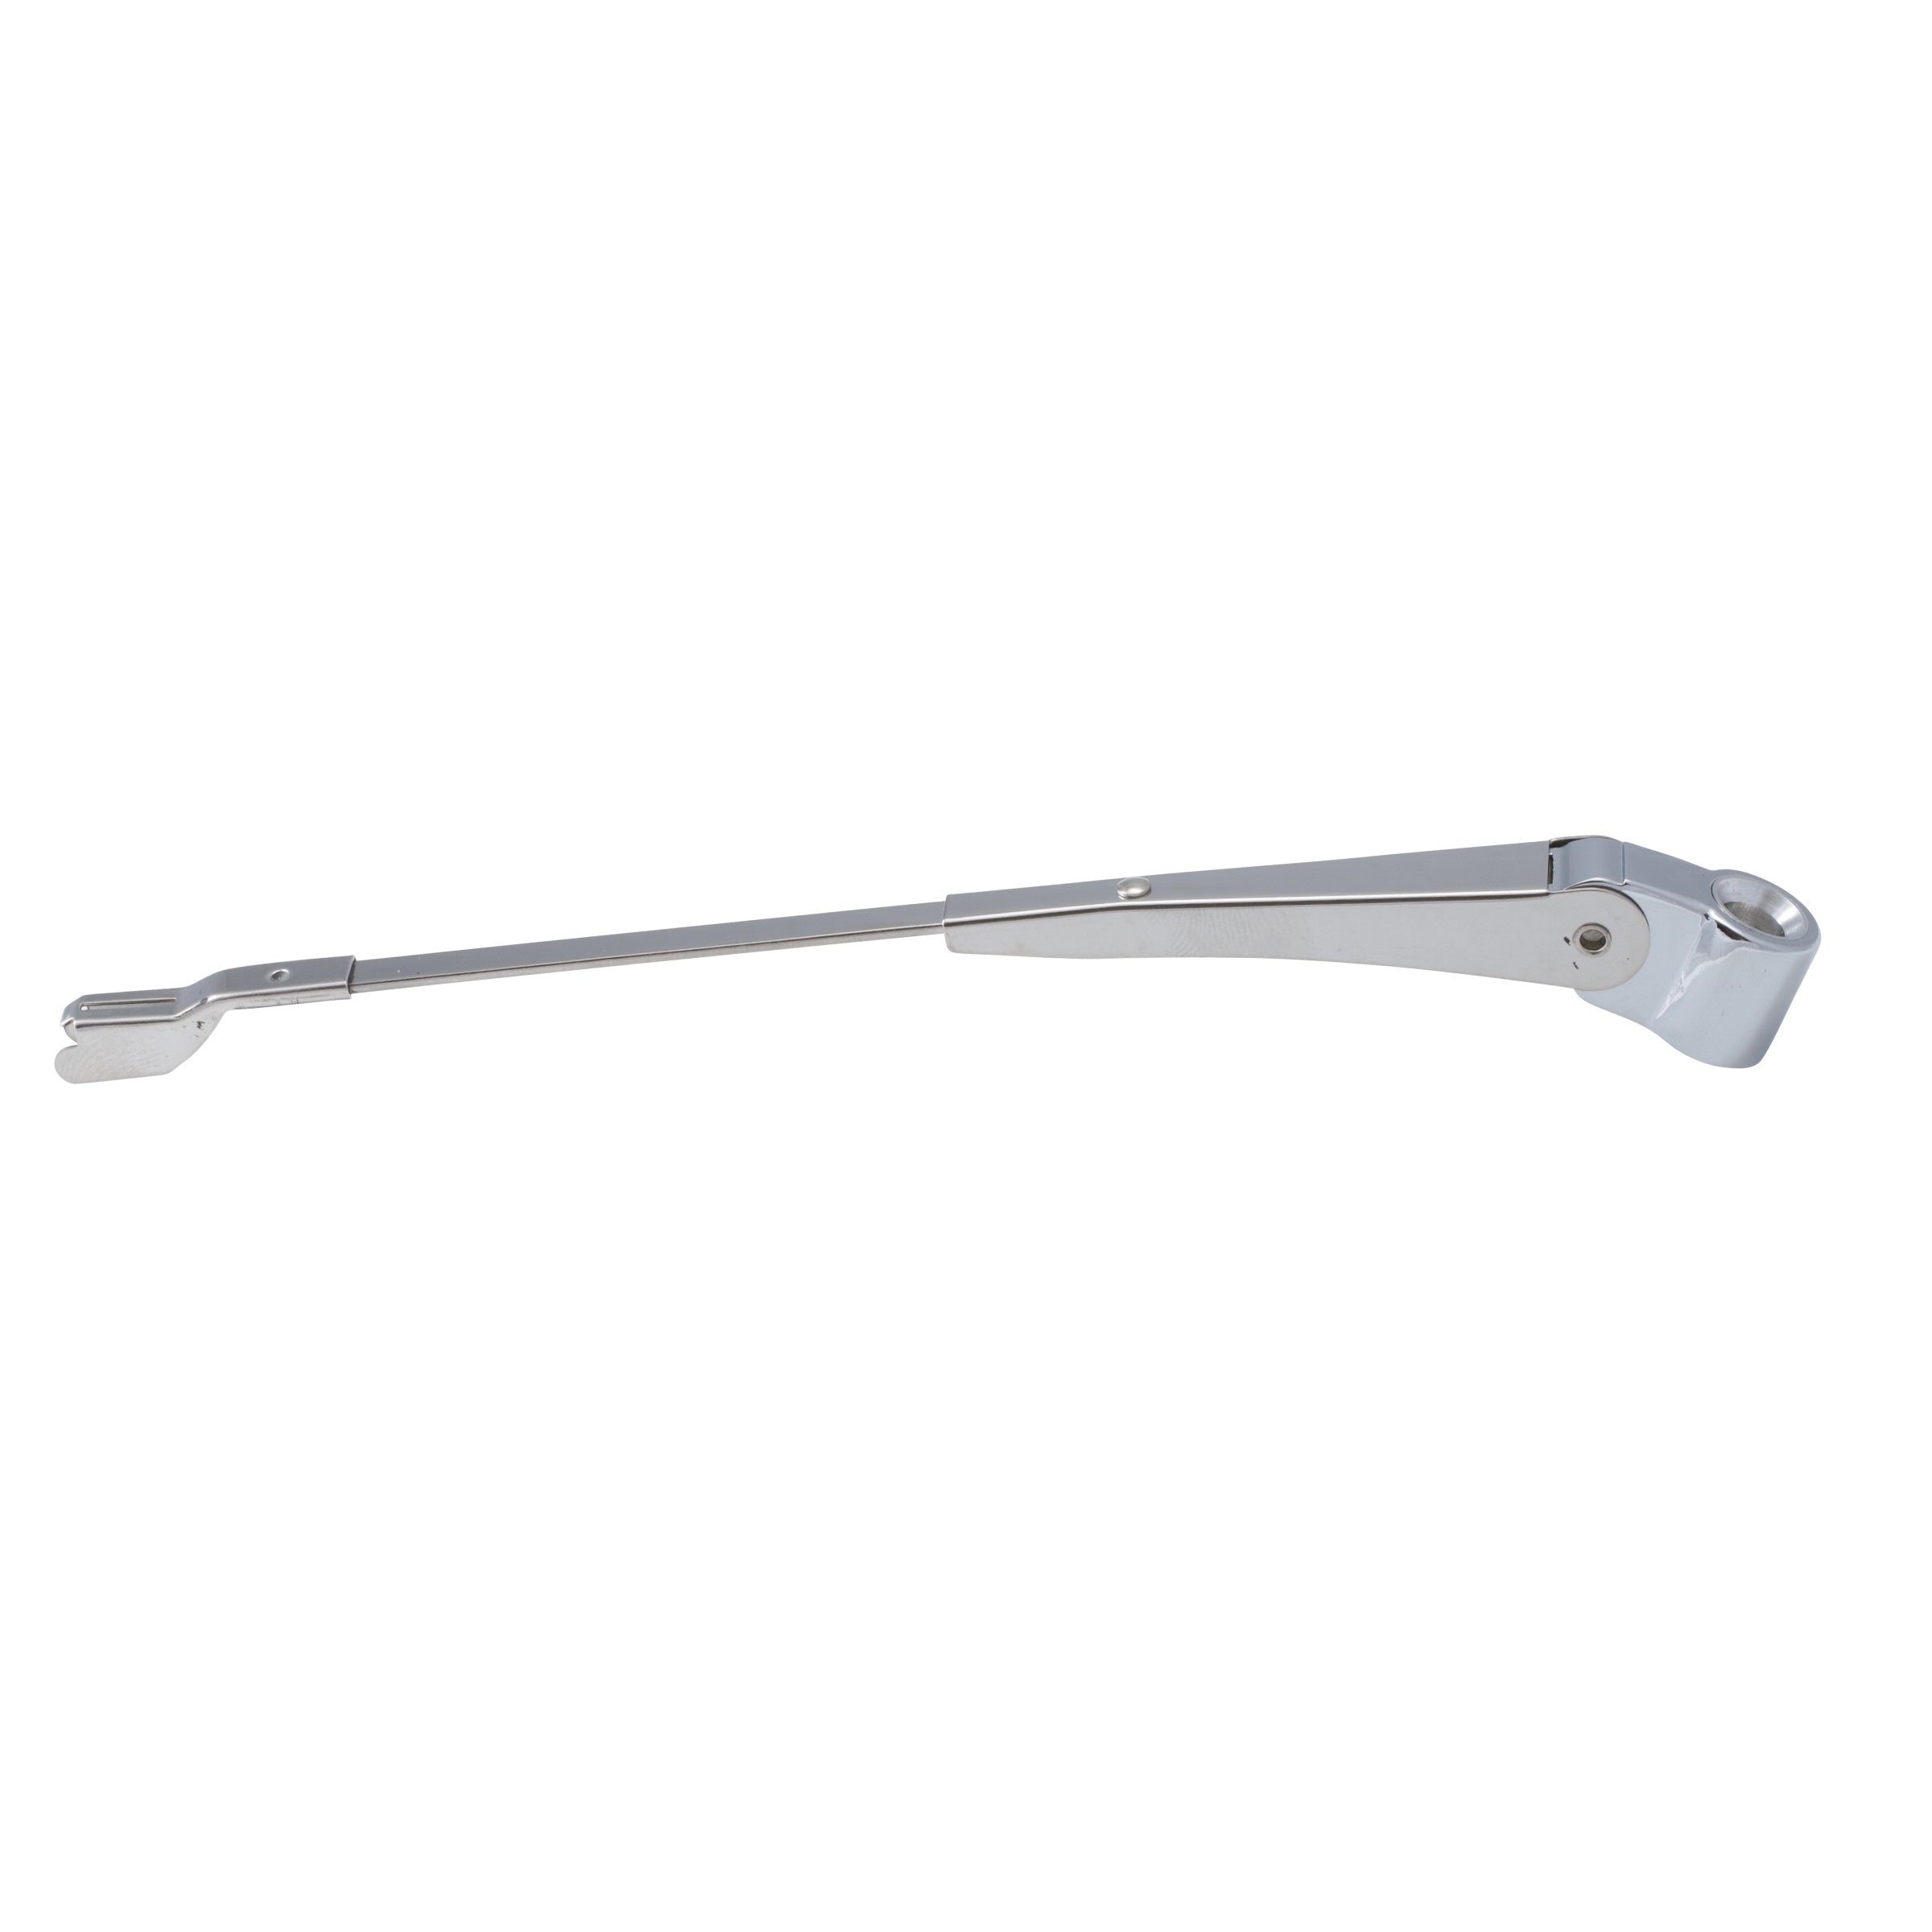 Windshield Wiper Arm (Hook & Saddle) • 1937-40 Ford Convertible & Station Wagon & 1940 Closed Car